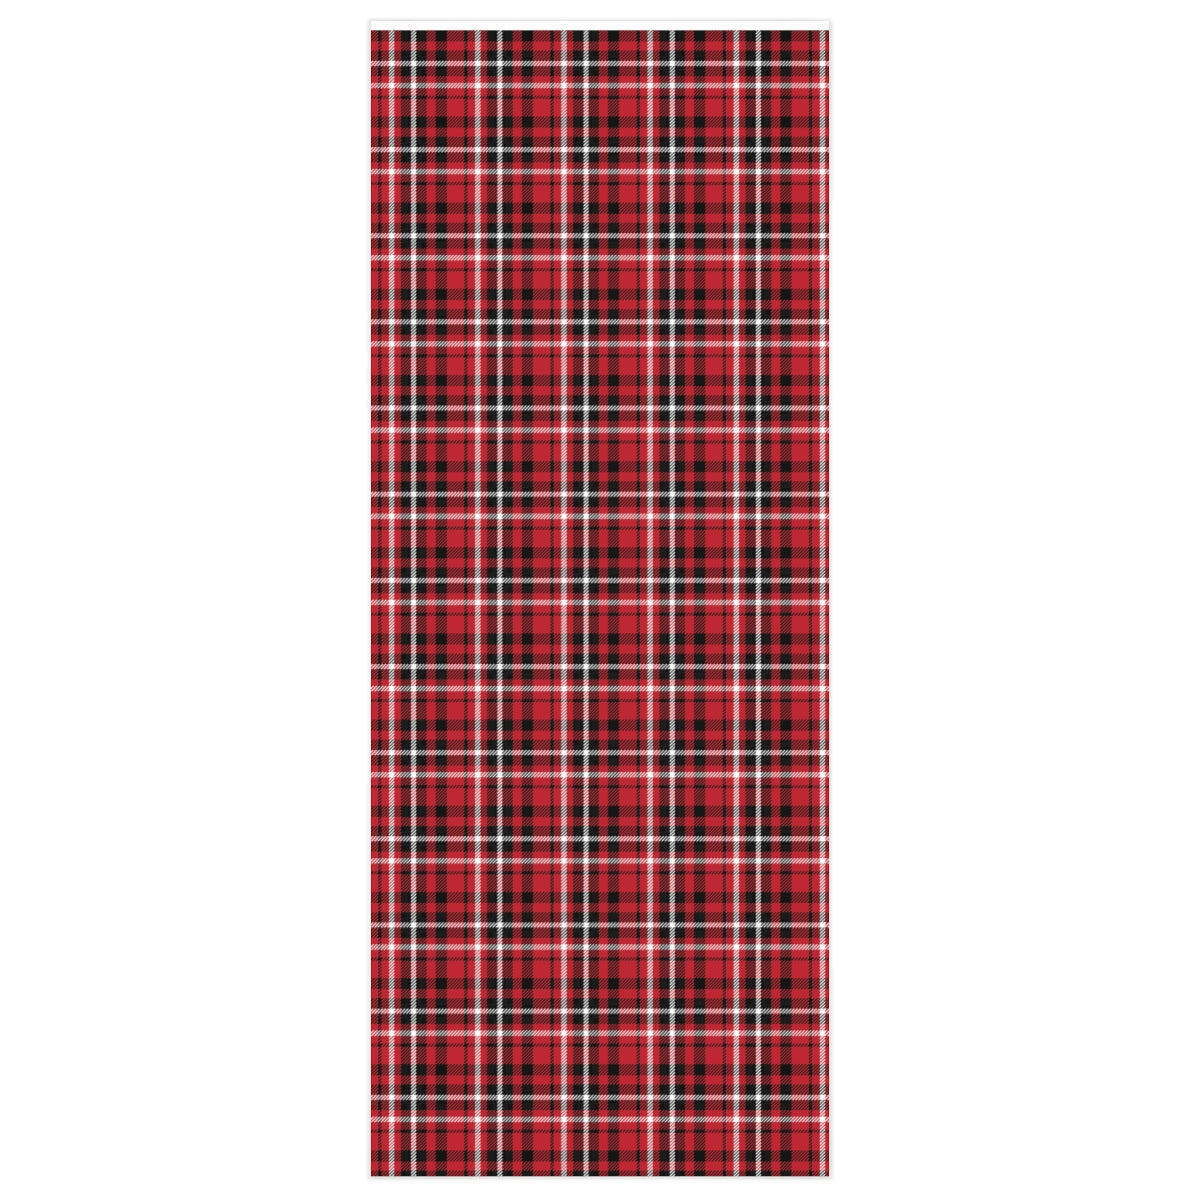 Tartan Red Plaid Christmas Wrapping Paper